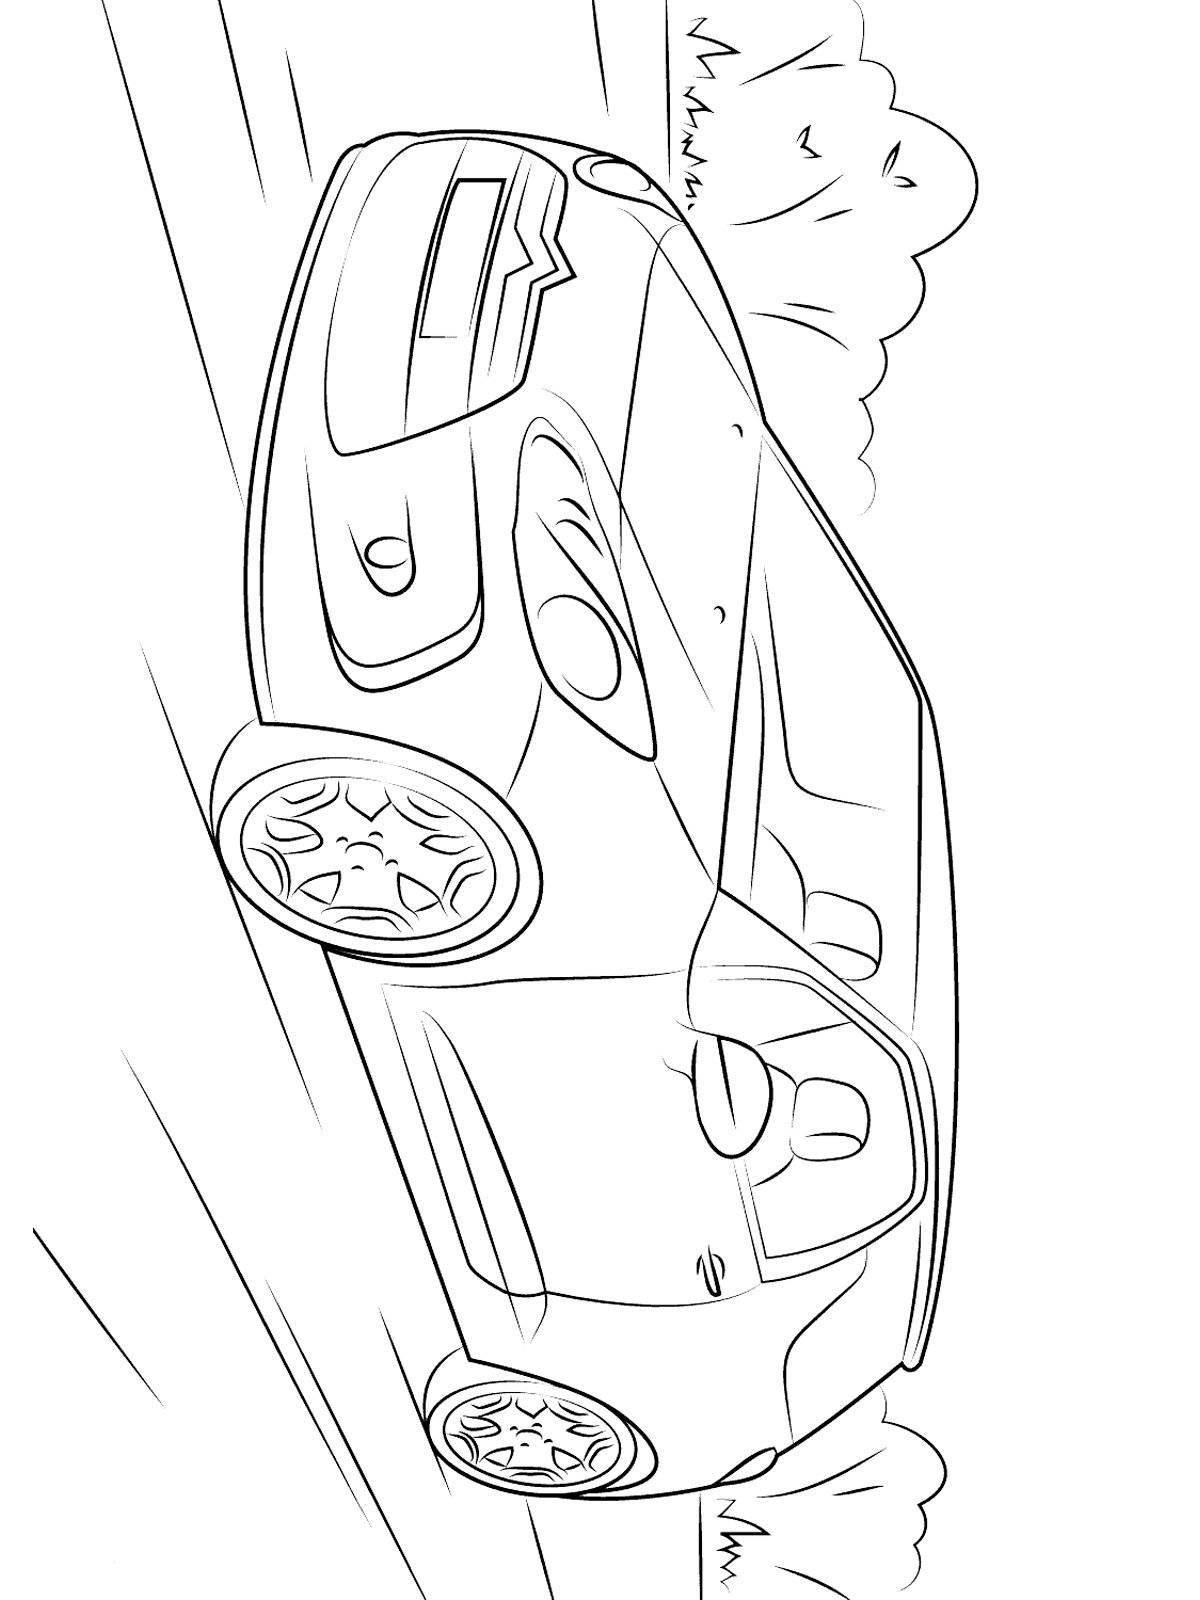 Charming citroen coloring page